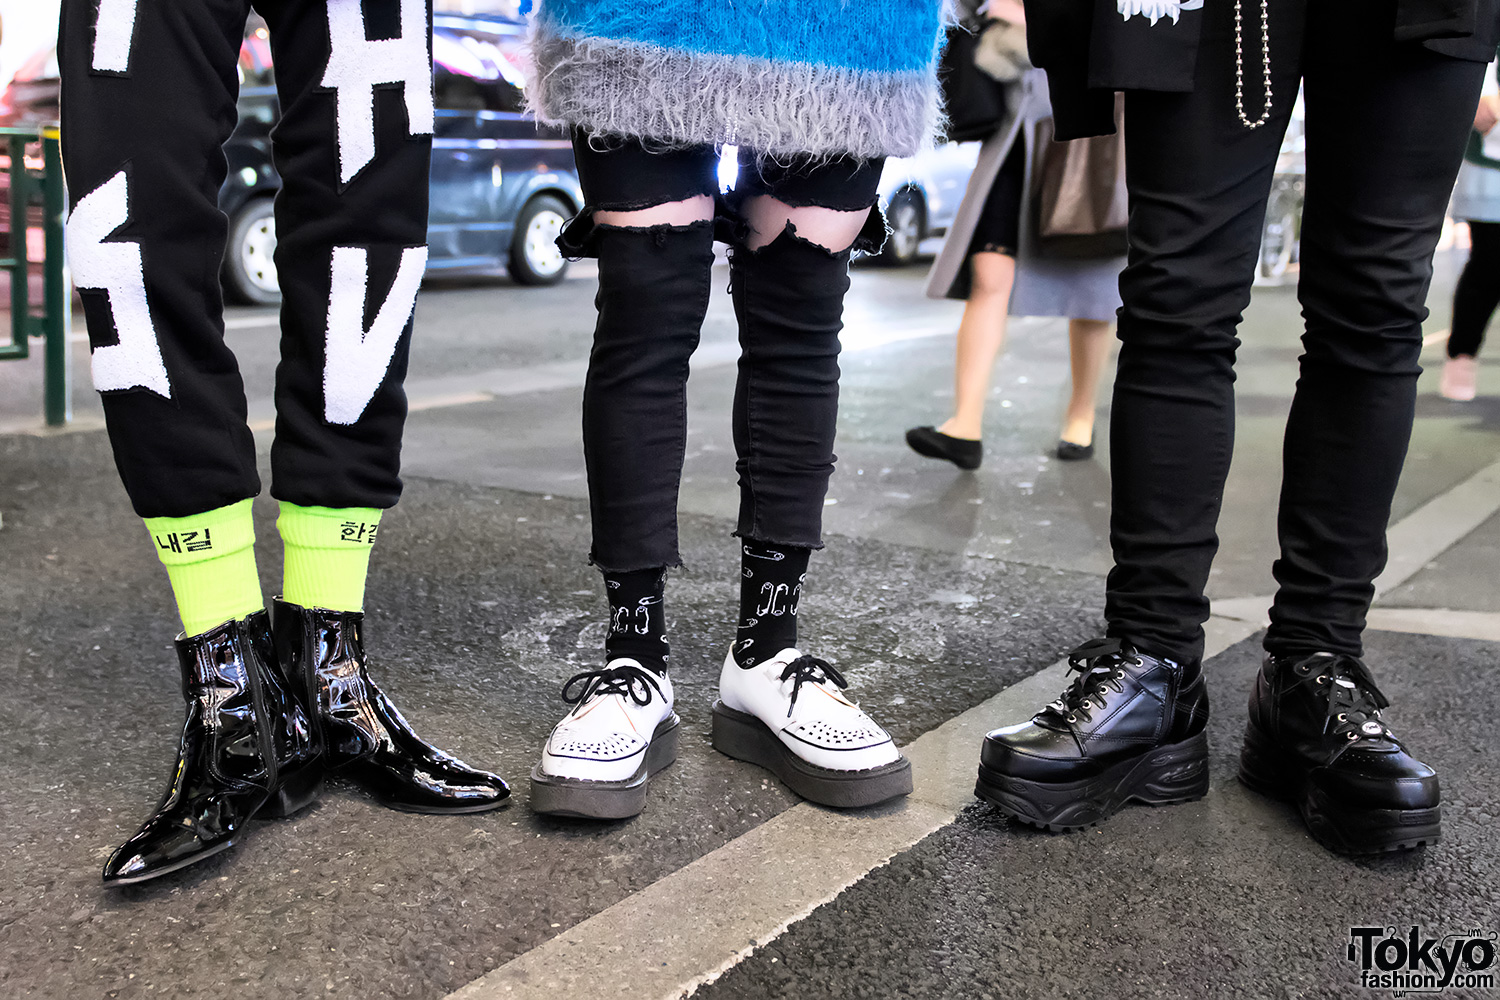 Harajuku Guys in Punk-Inspired Styles w/ 99%IS-, MISBHV, More Than Dope ...